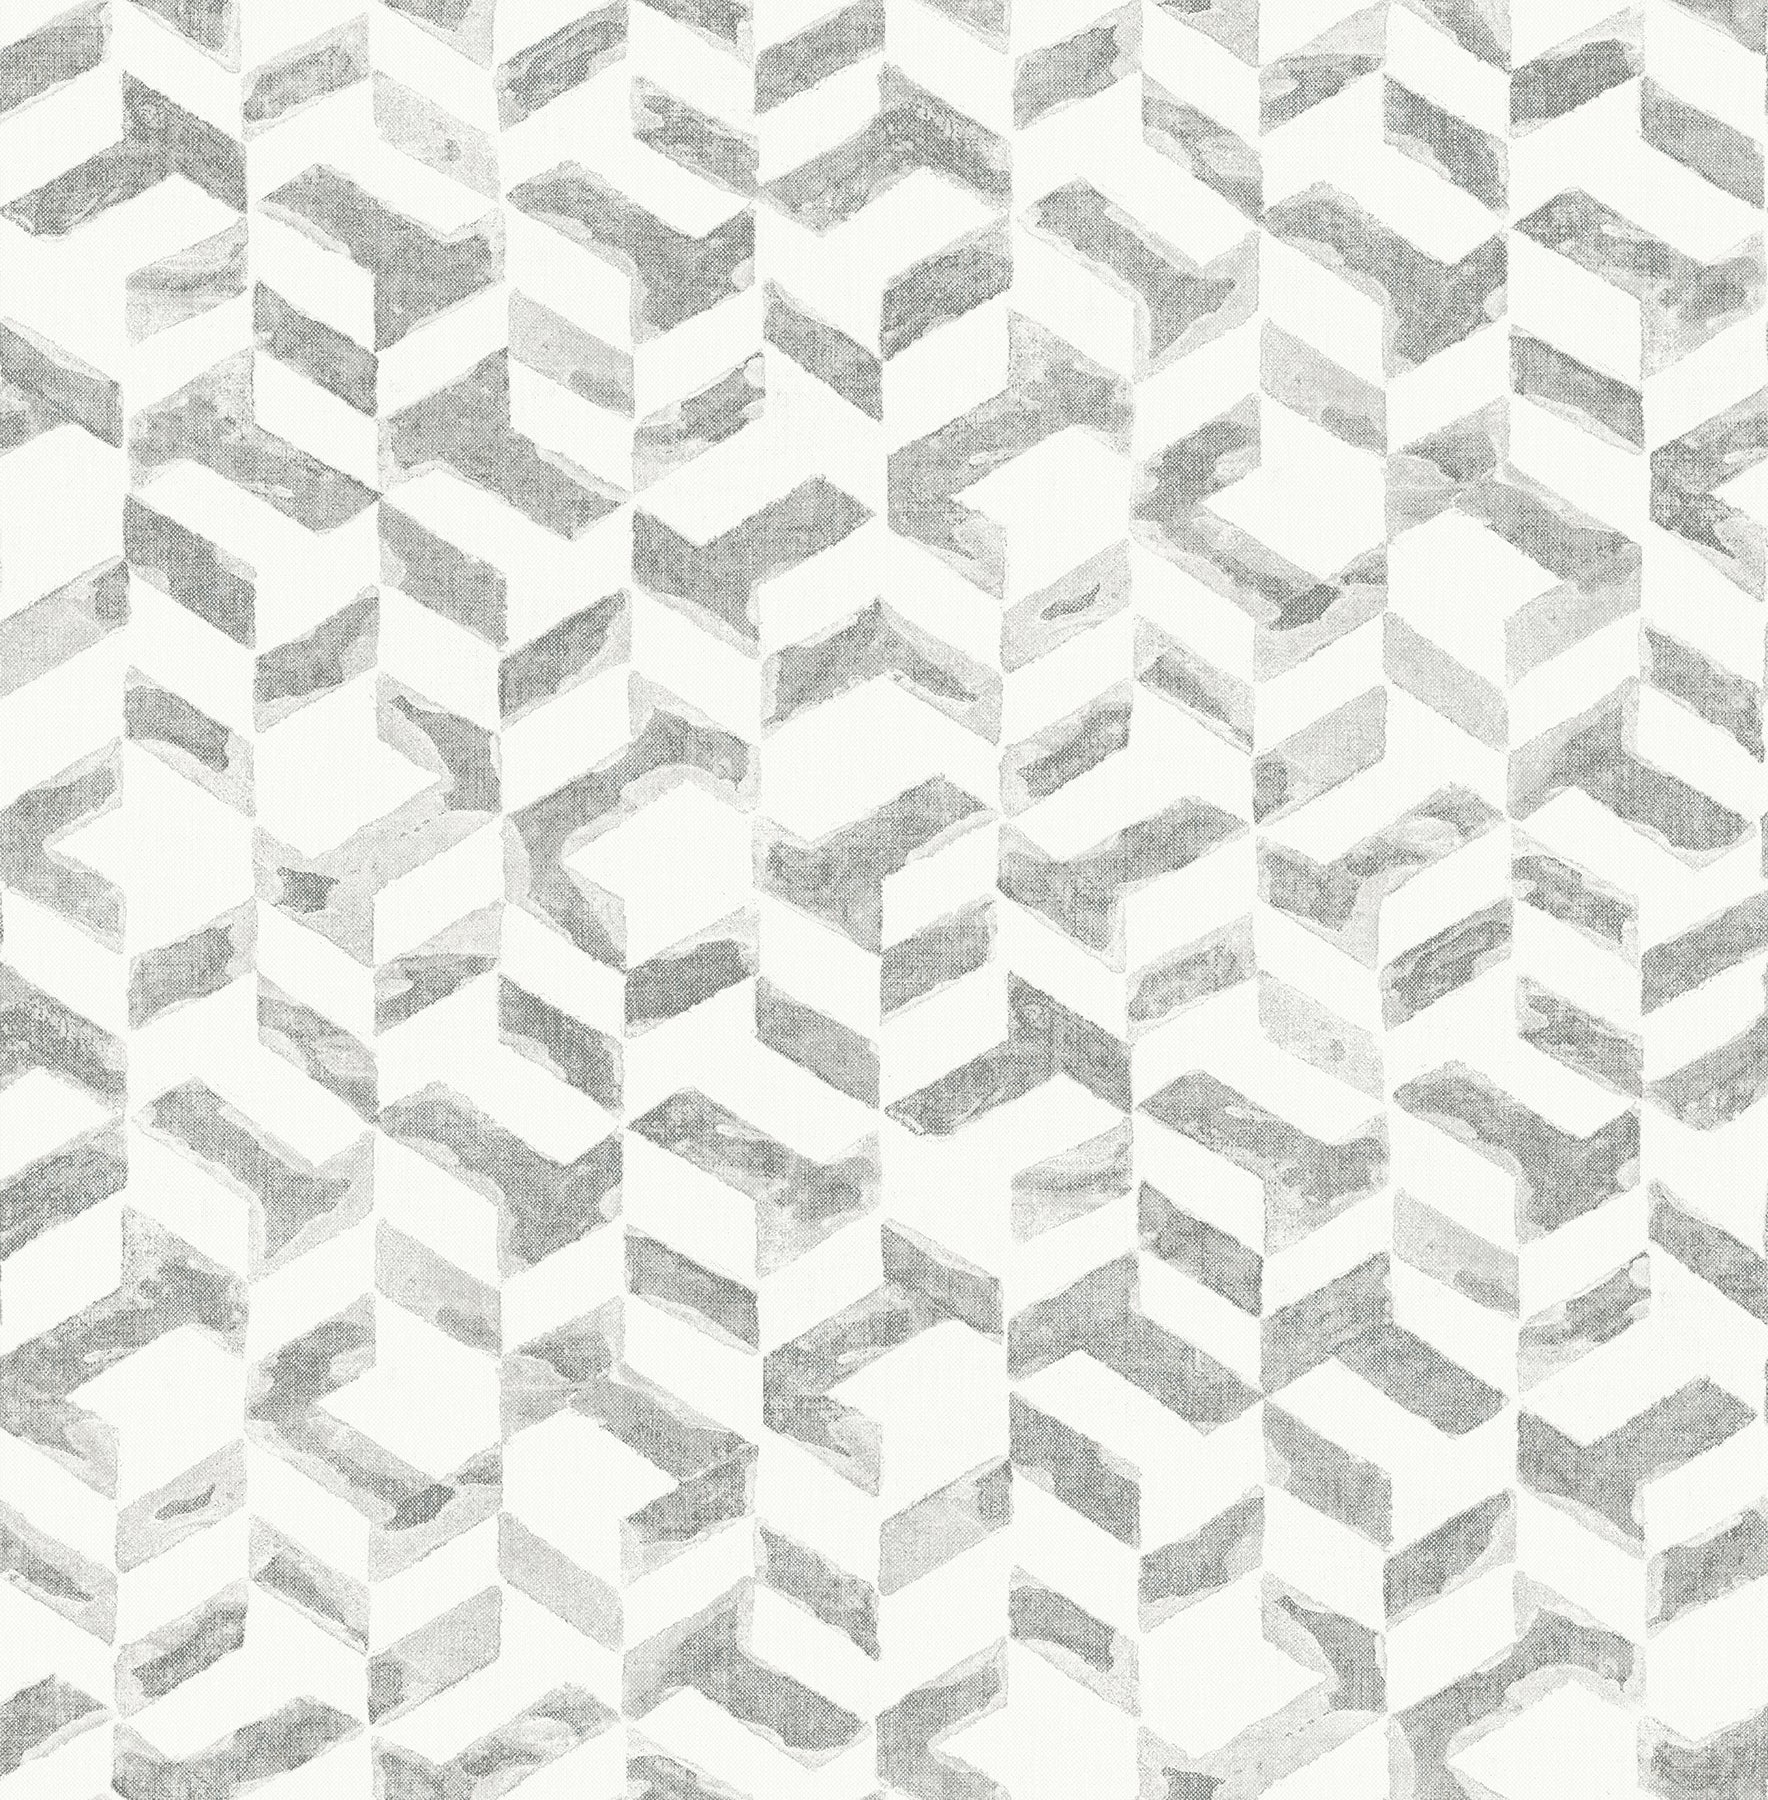 Buy 2902-25501 Theory Instep Platinum Abstract Geometric A Street Prints Wallpaper